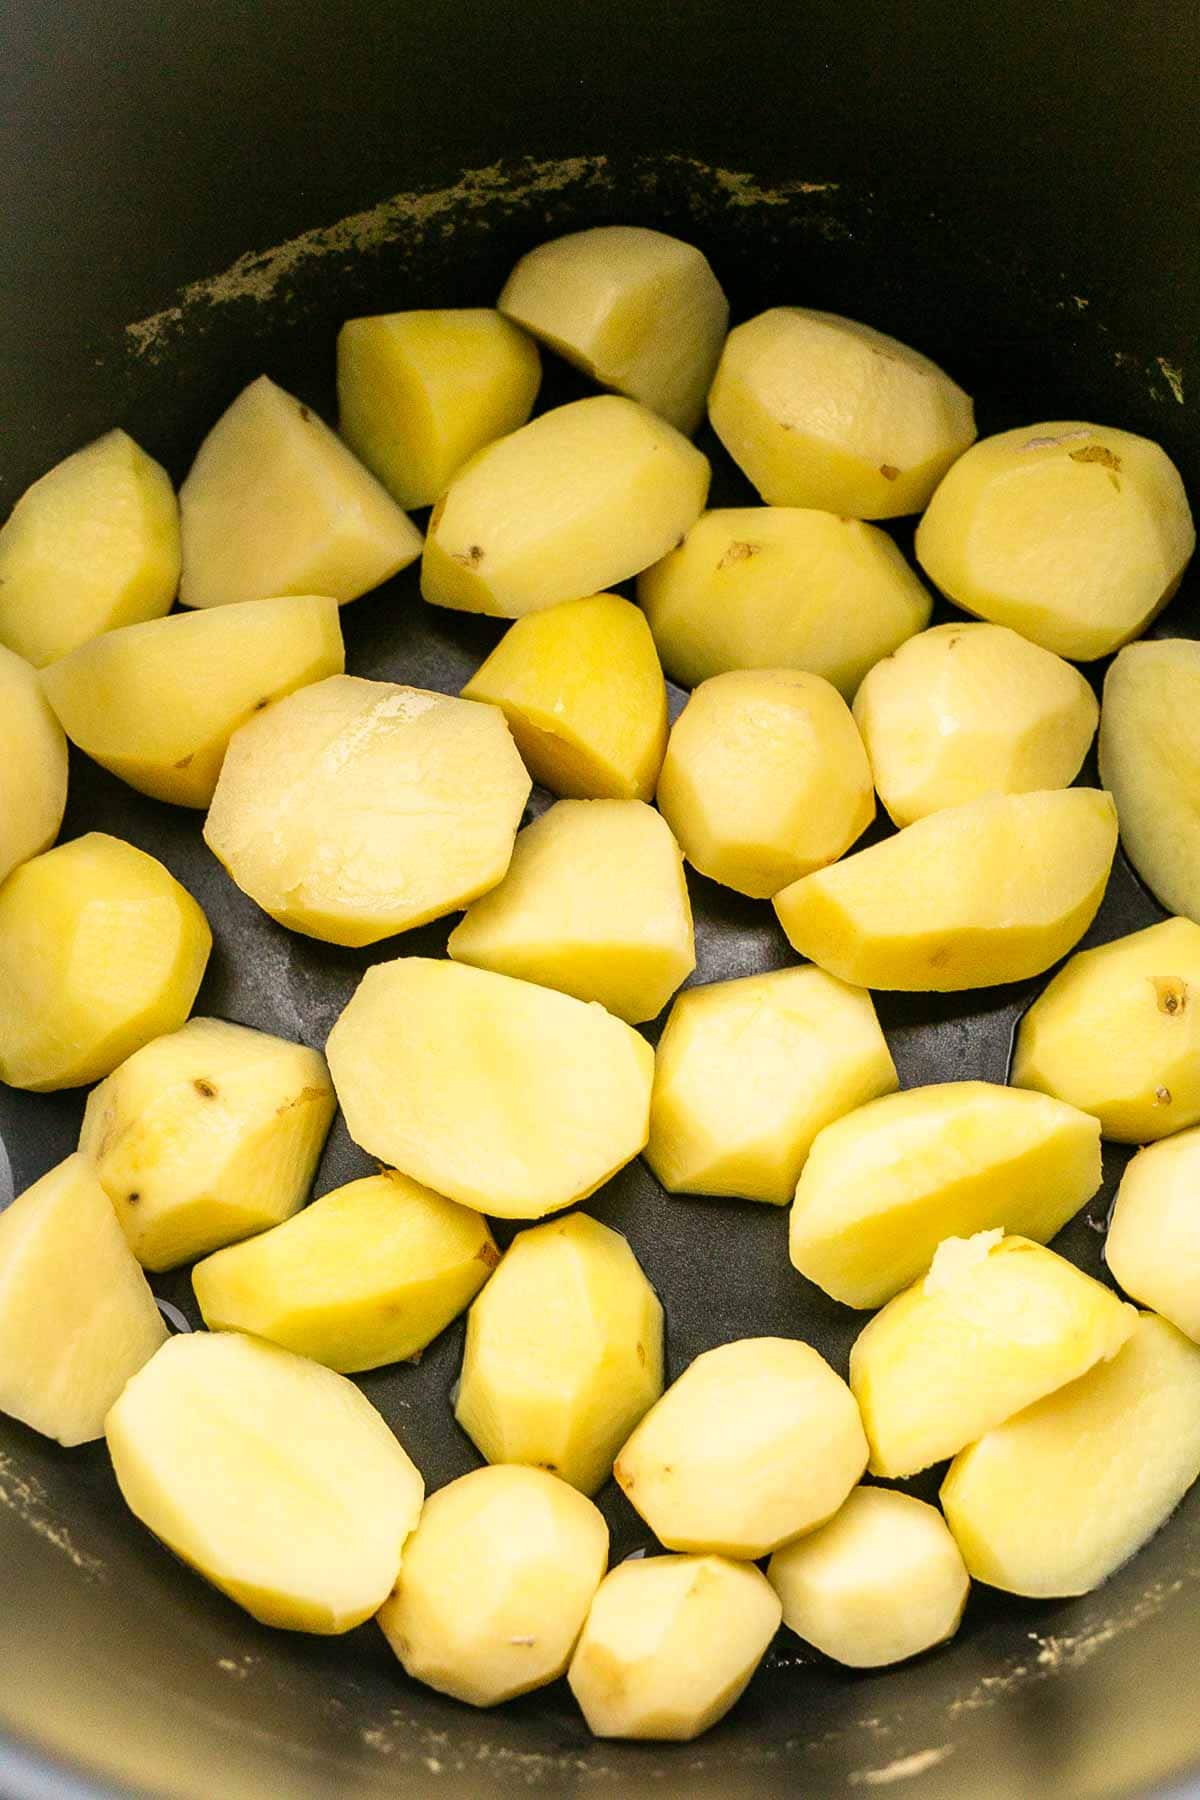 Get perfectly boiled potatoes every time? Make these instant boiled potatoes! In less than 15 minutes, you have soft, steamed, and spongy potatoes on the table. So if you need boiled potatoes, get your Instant Pot, Crock-Pot Quick Cooker or Pressure Cooker. Want to try? Visit takeoutfood.best for full recipe